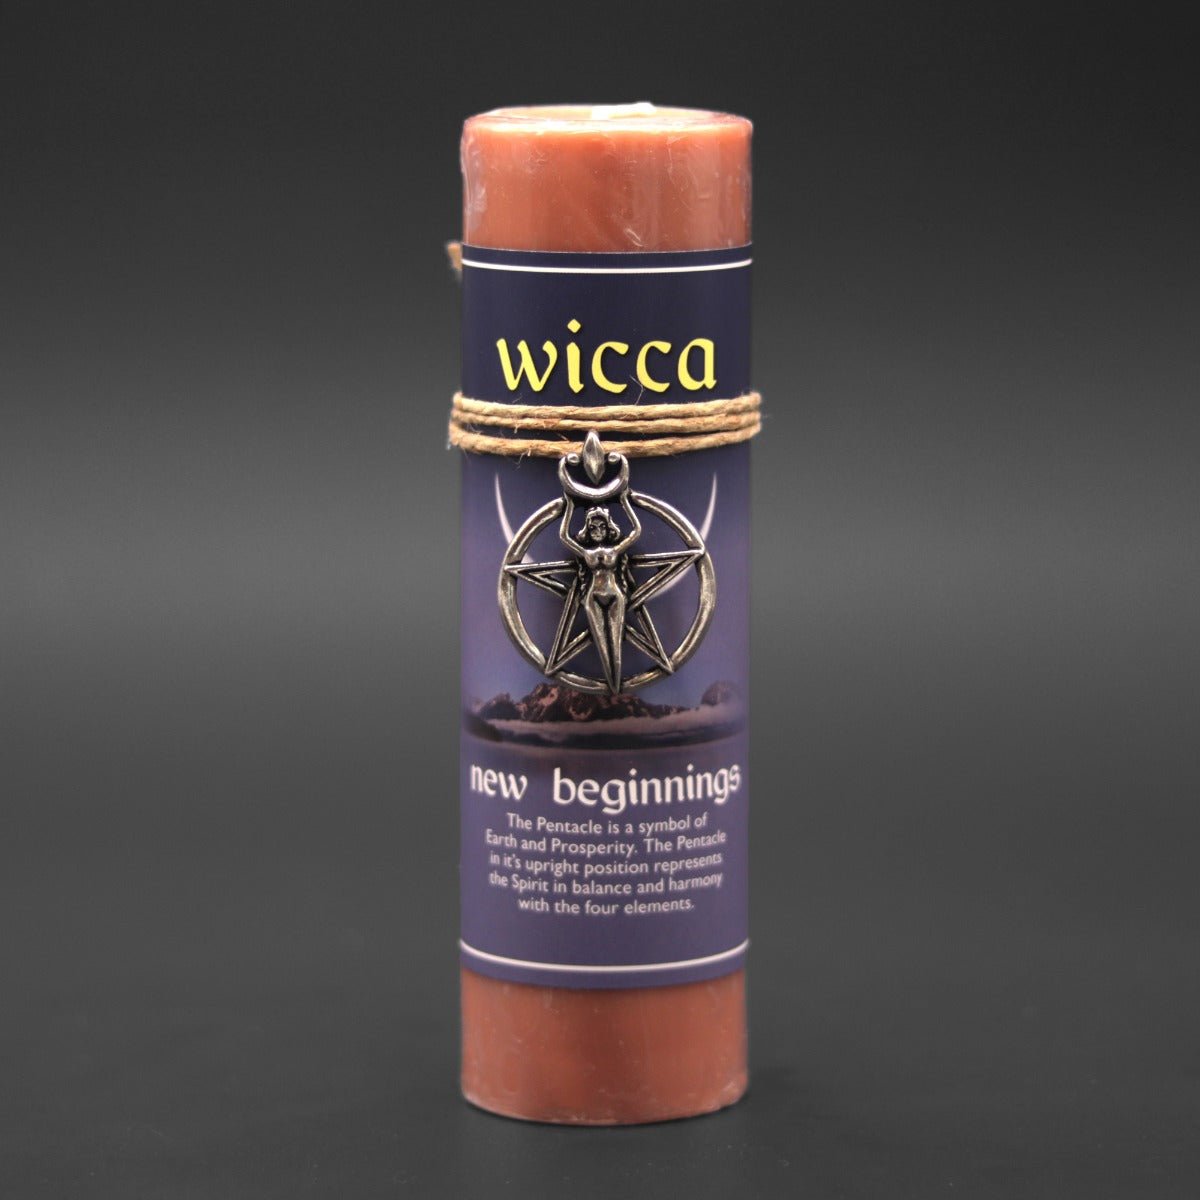 Wicca New Beginnings Candle with Pendant - 13 Moons